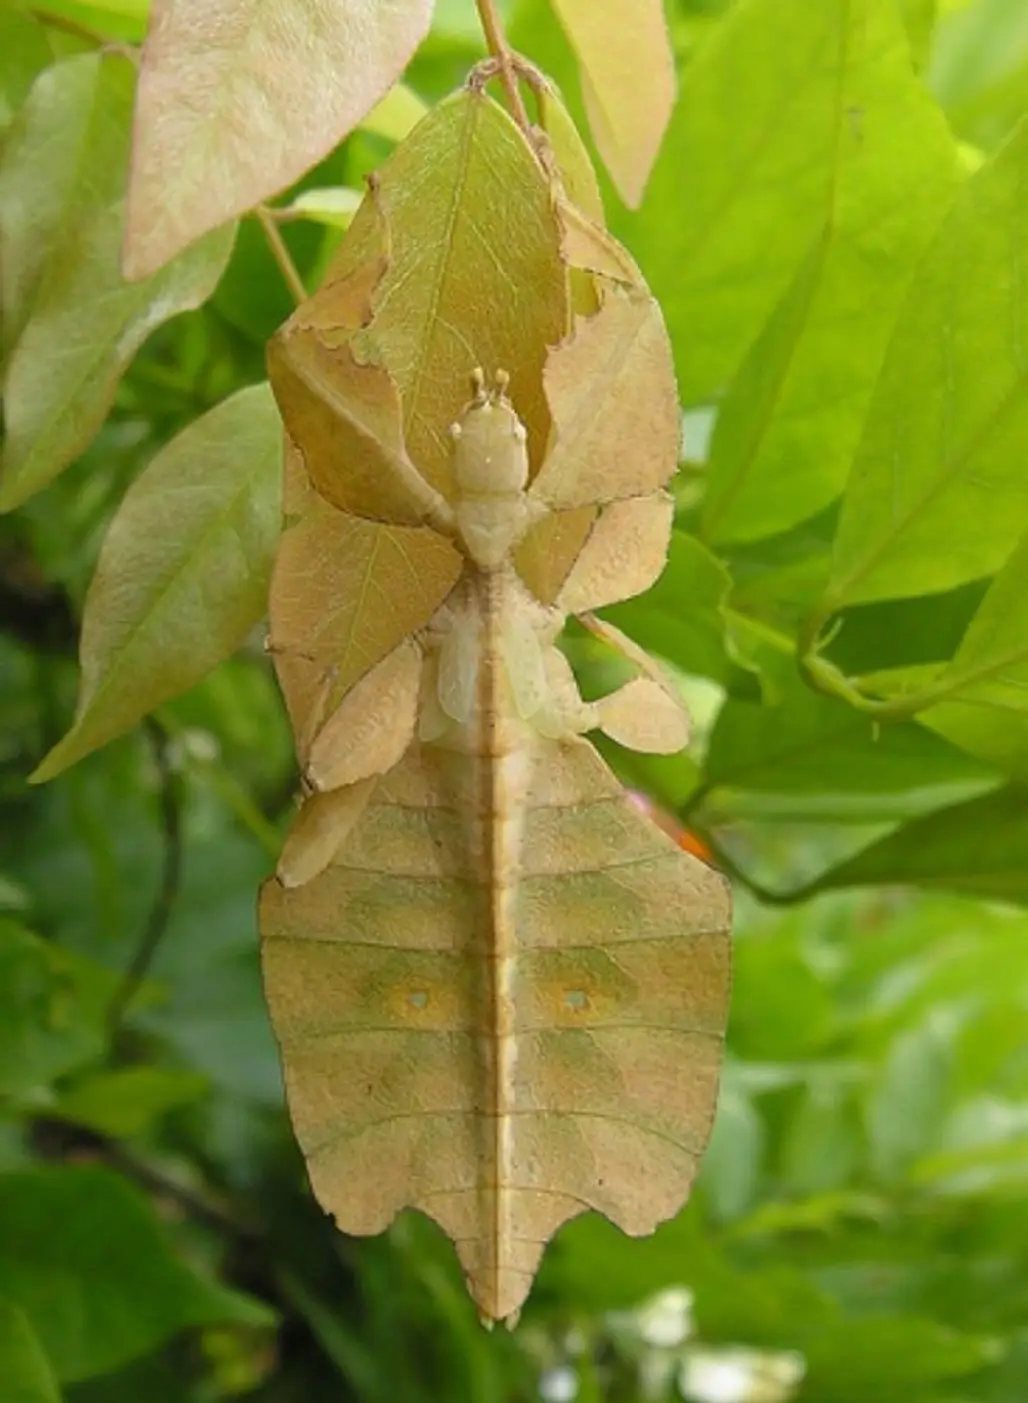 The Leaf Insect